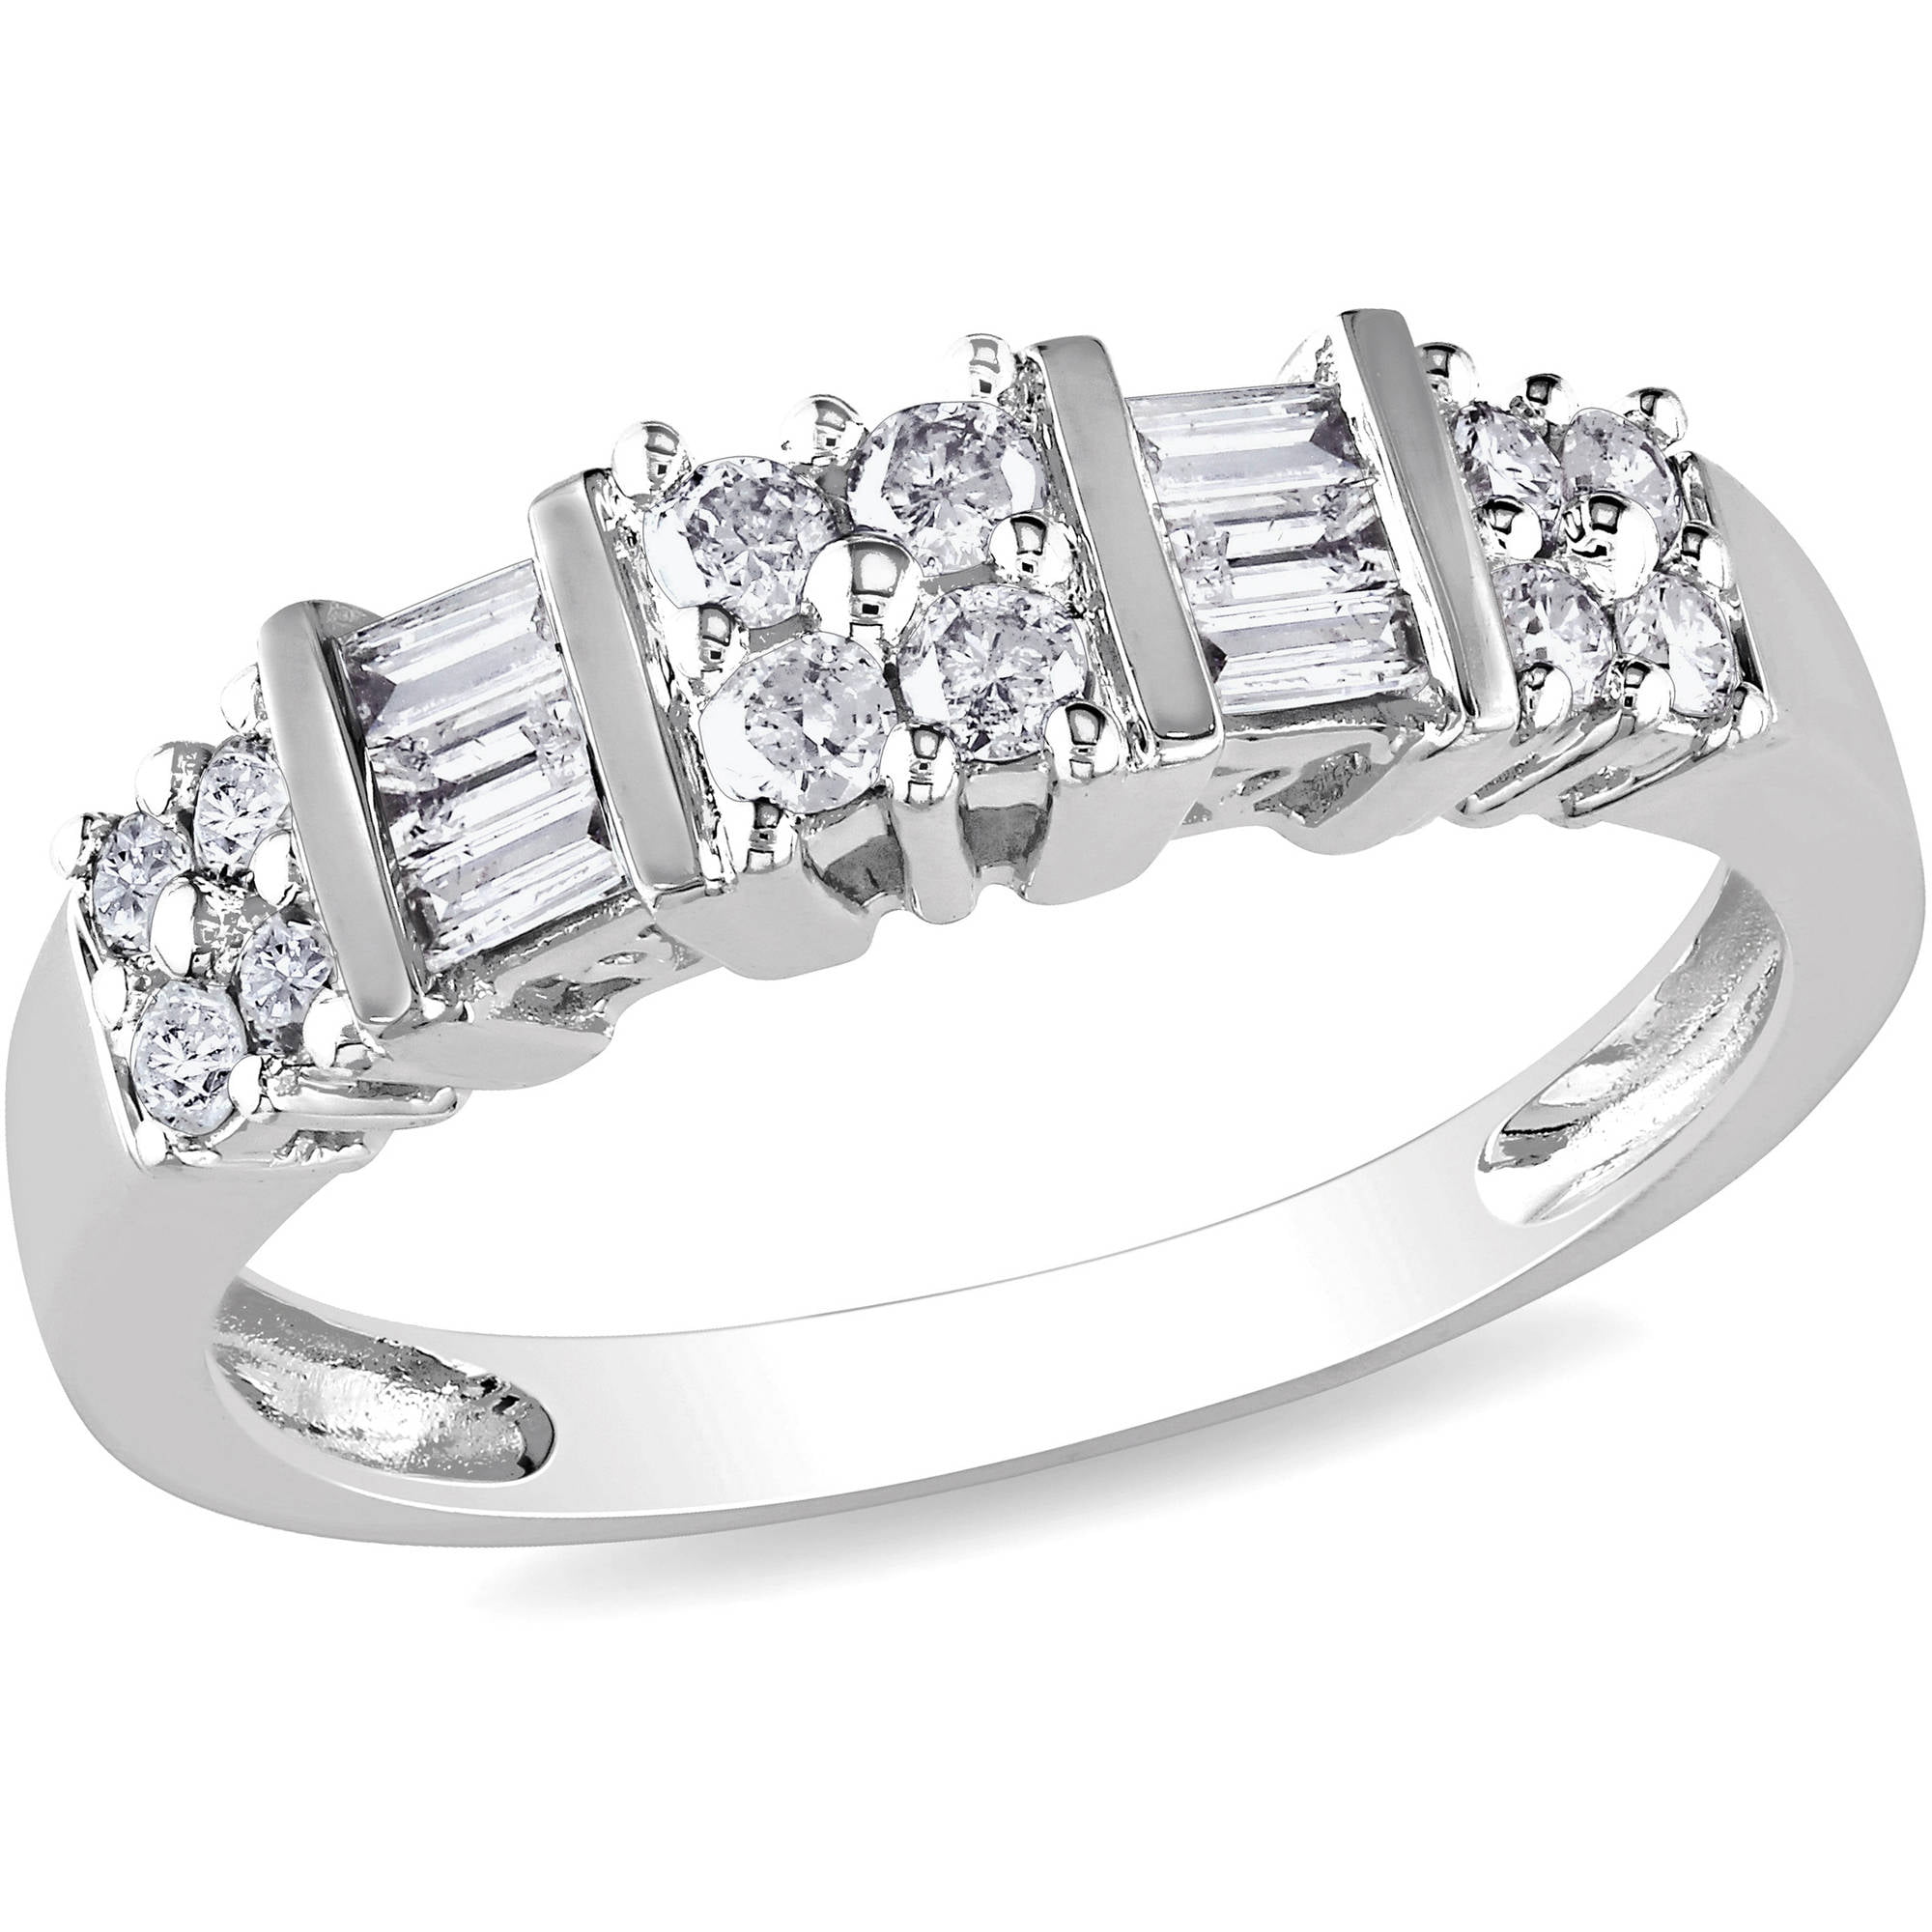 wow 2ct baguette cut diamond eternity bridal engagement Ring 14k white gold over 